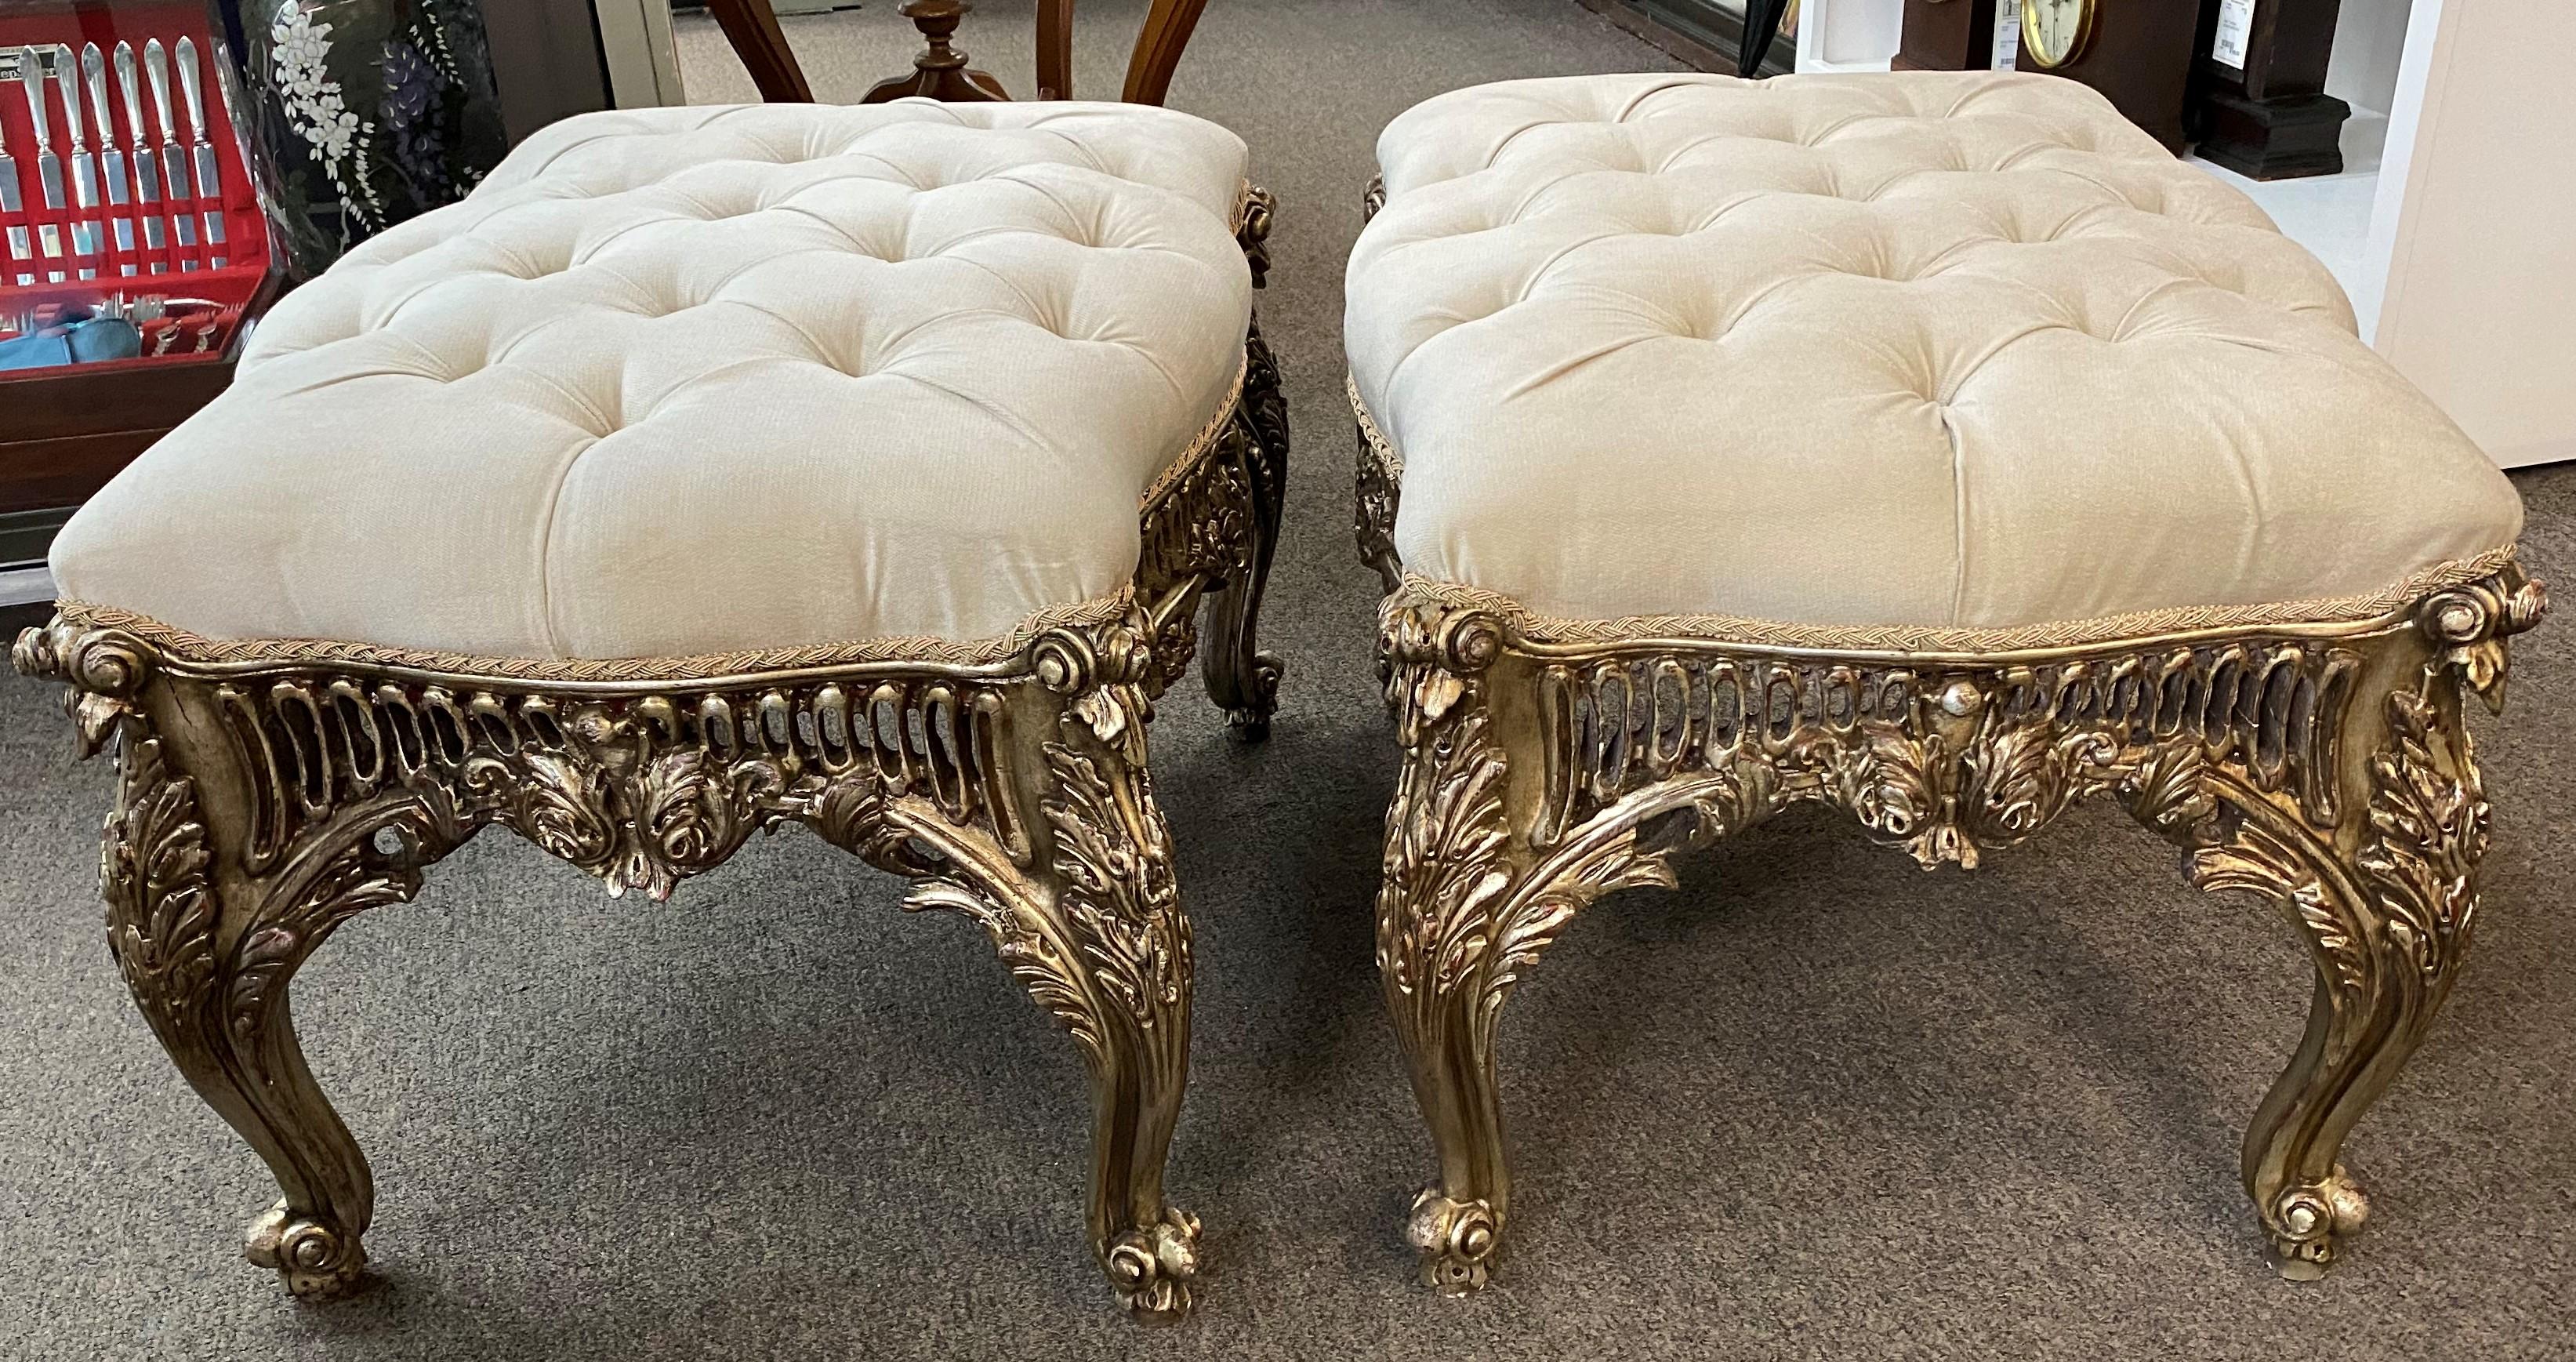 Pair of Baroque or Rococo Style Pierce Carved Silvered Ottomans For Sale 2